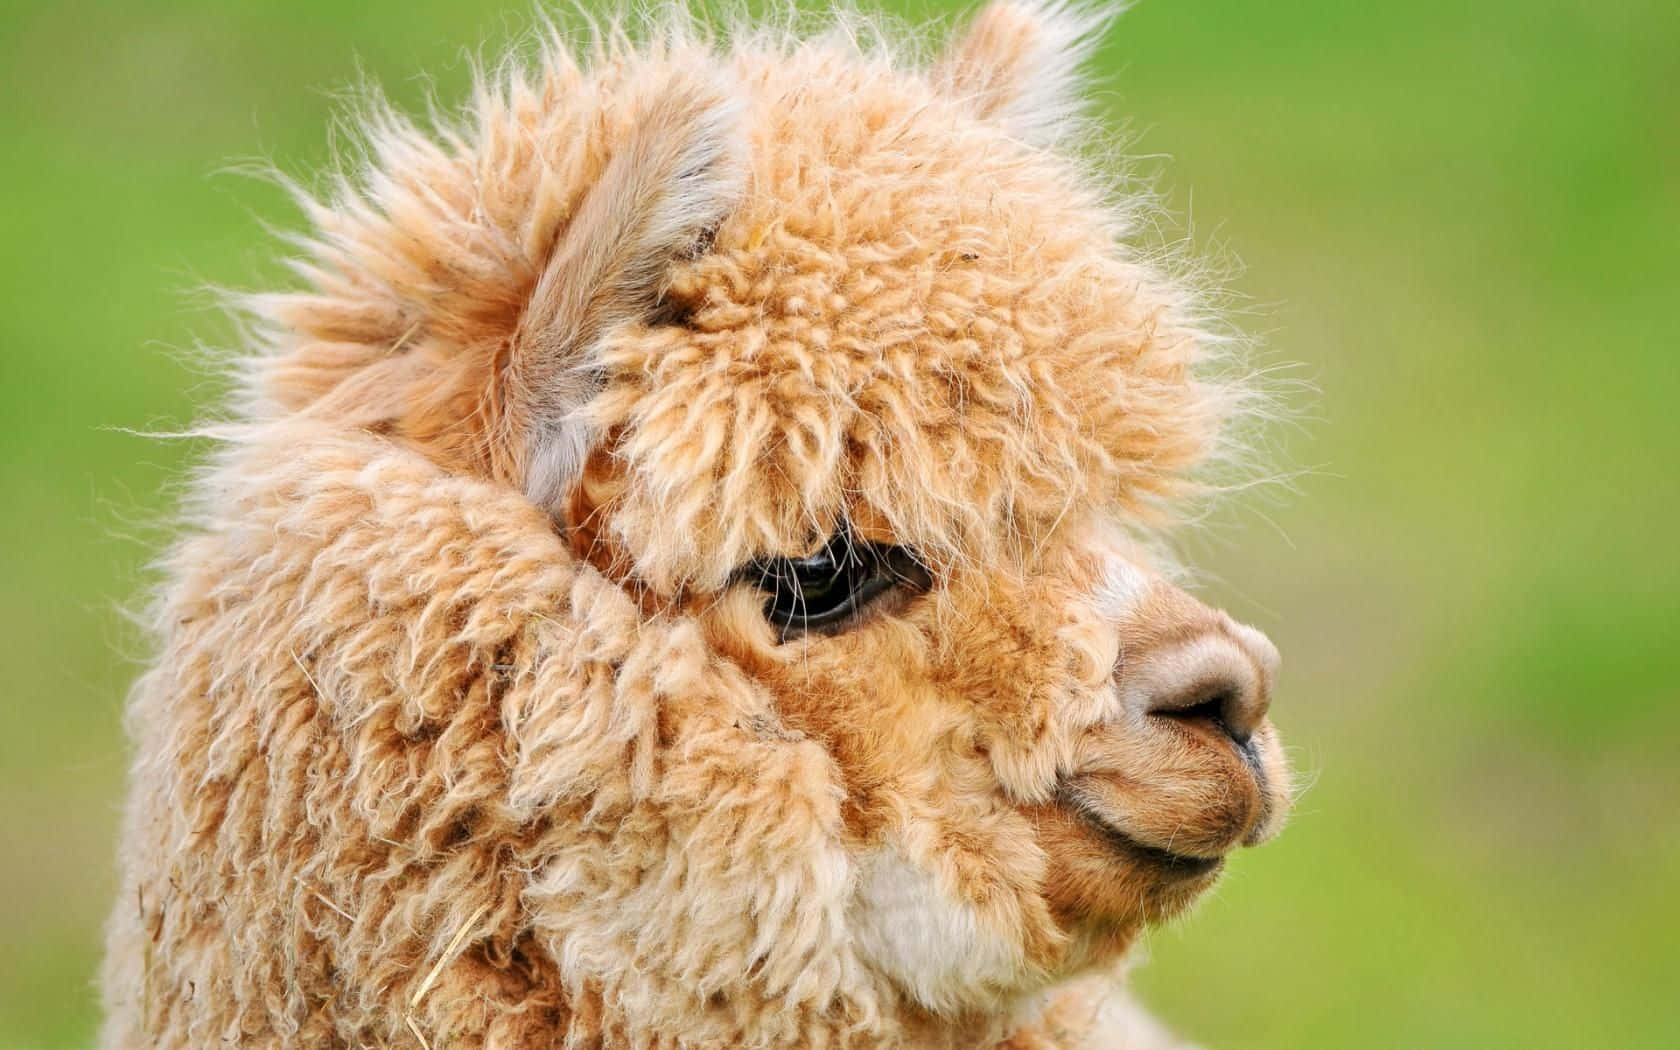 Hairy Funny Llama Side Profile Picture